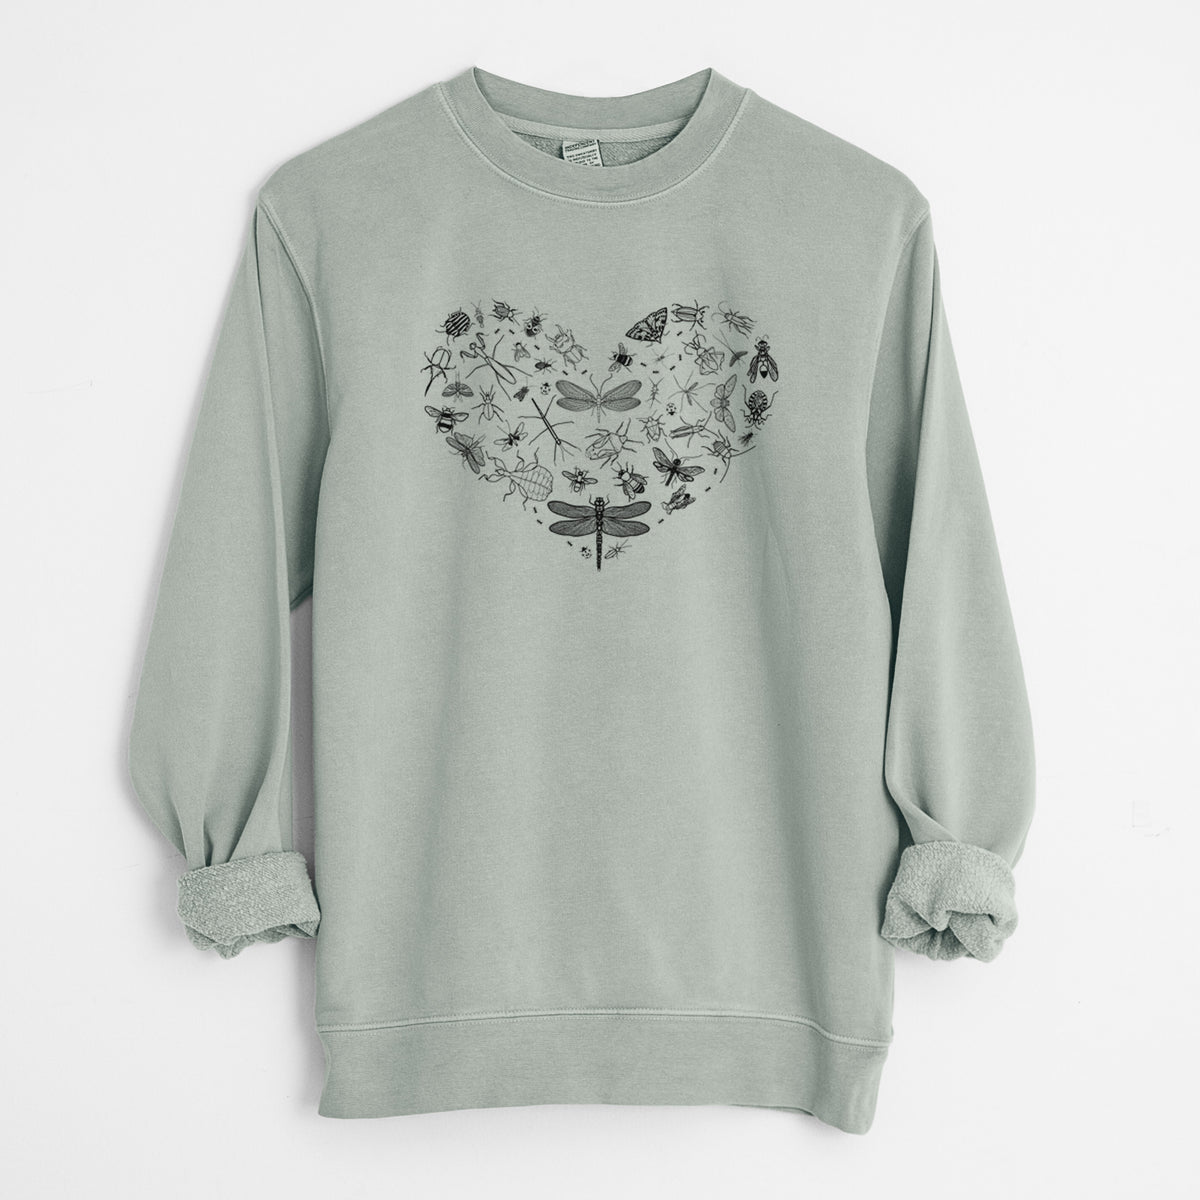 Heart Full of Insects - Unisex Pigment Dyed Crew Sweatshirt